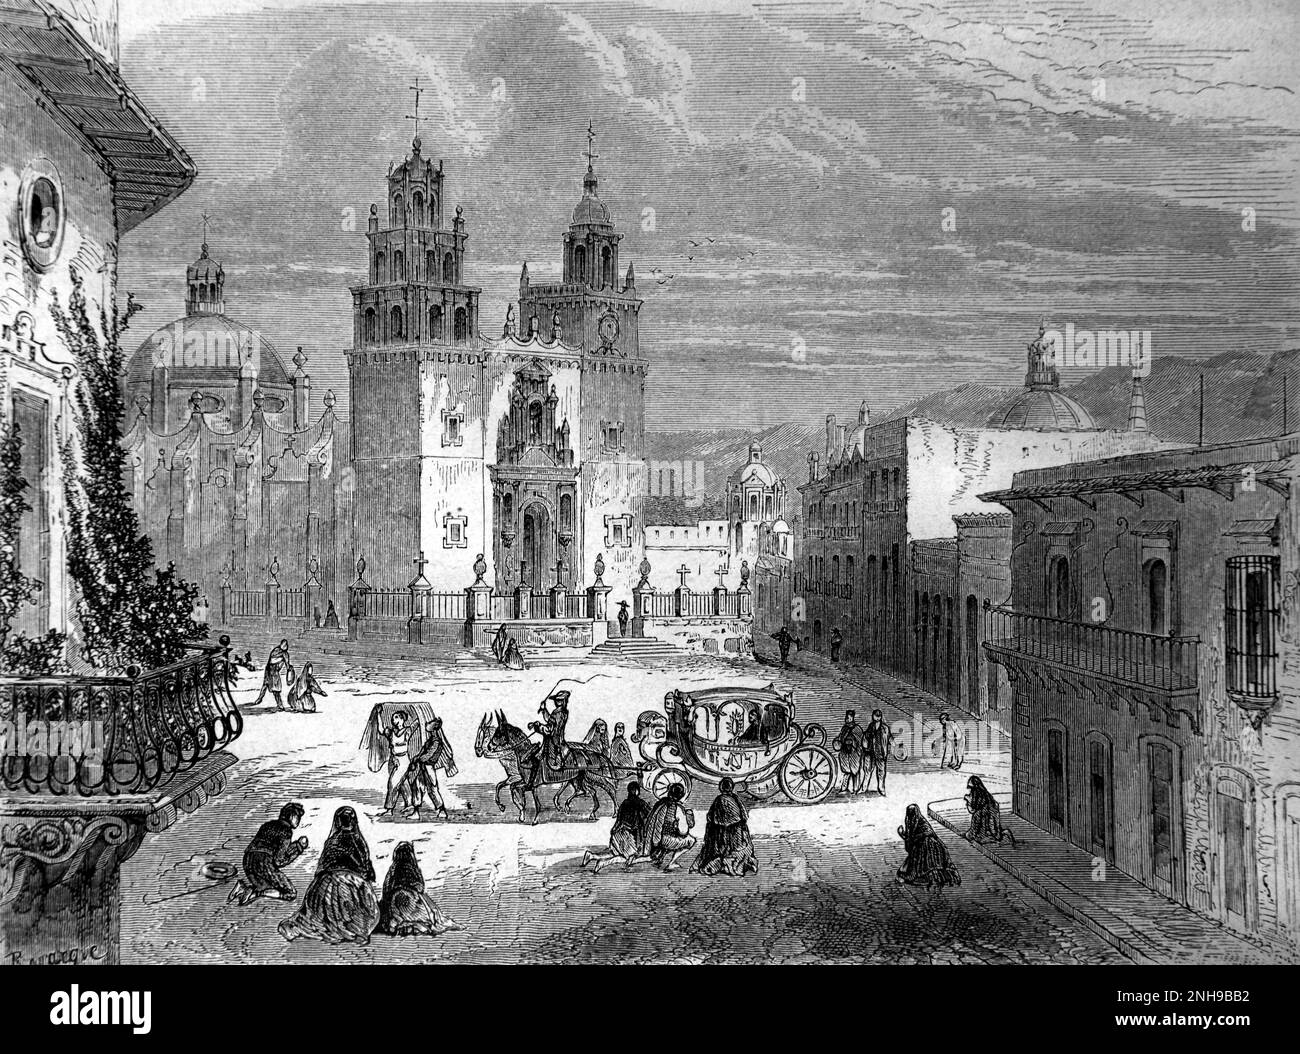 Carriage or Coach & Horses Crossing Plaza Mayor, Town Square and Cathedral in the Old Town Guanajuato Mexico. Vintage Engraving or Illustration 1862 Stock Photo